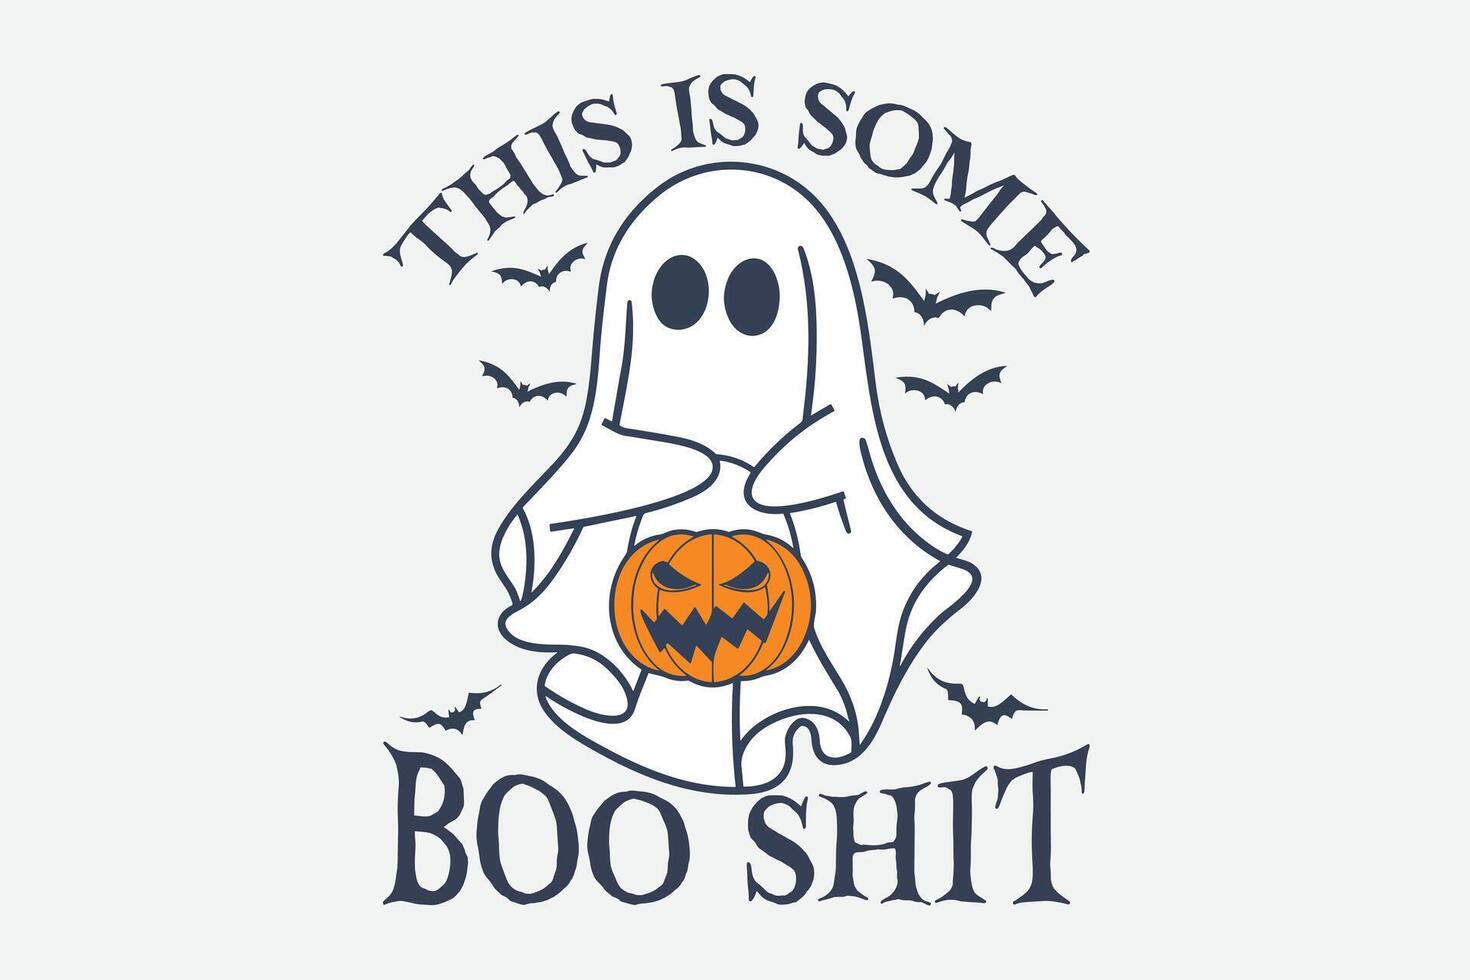 This is some boo sheet funny halloween ghost t-shirt design vector